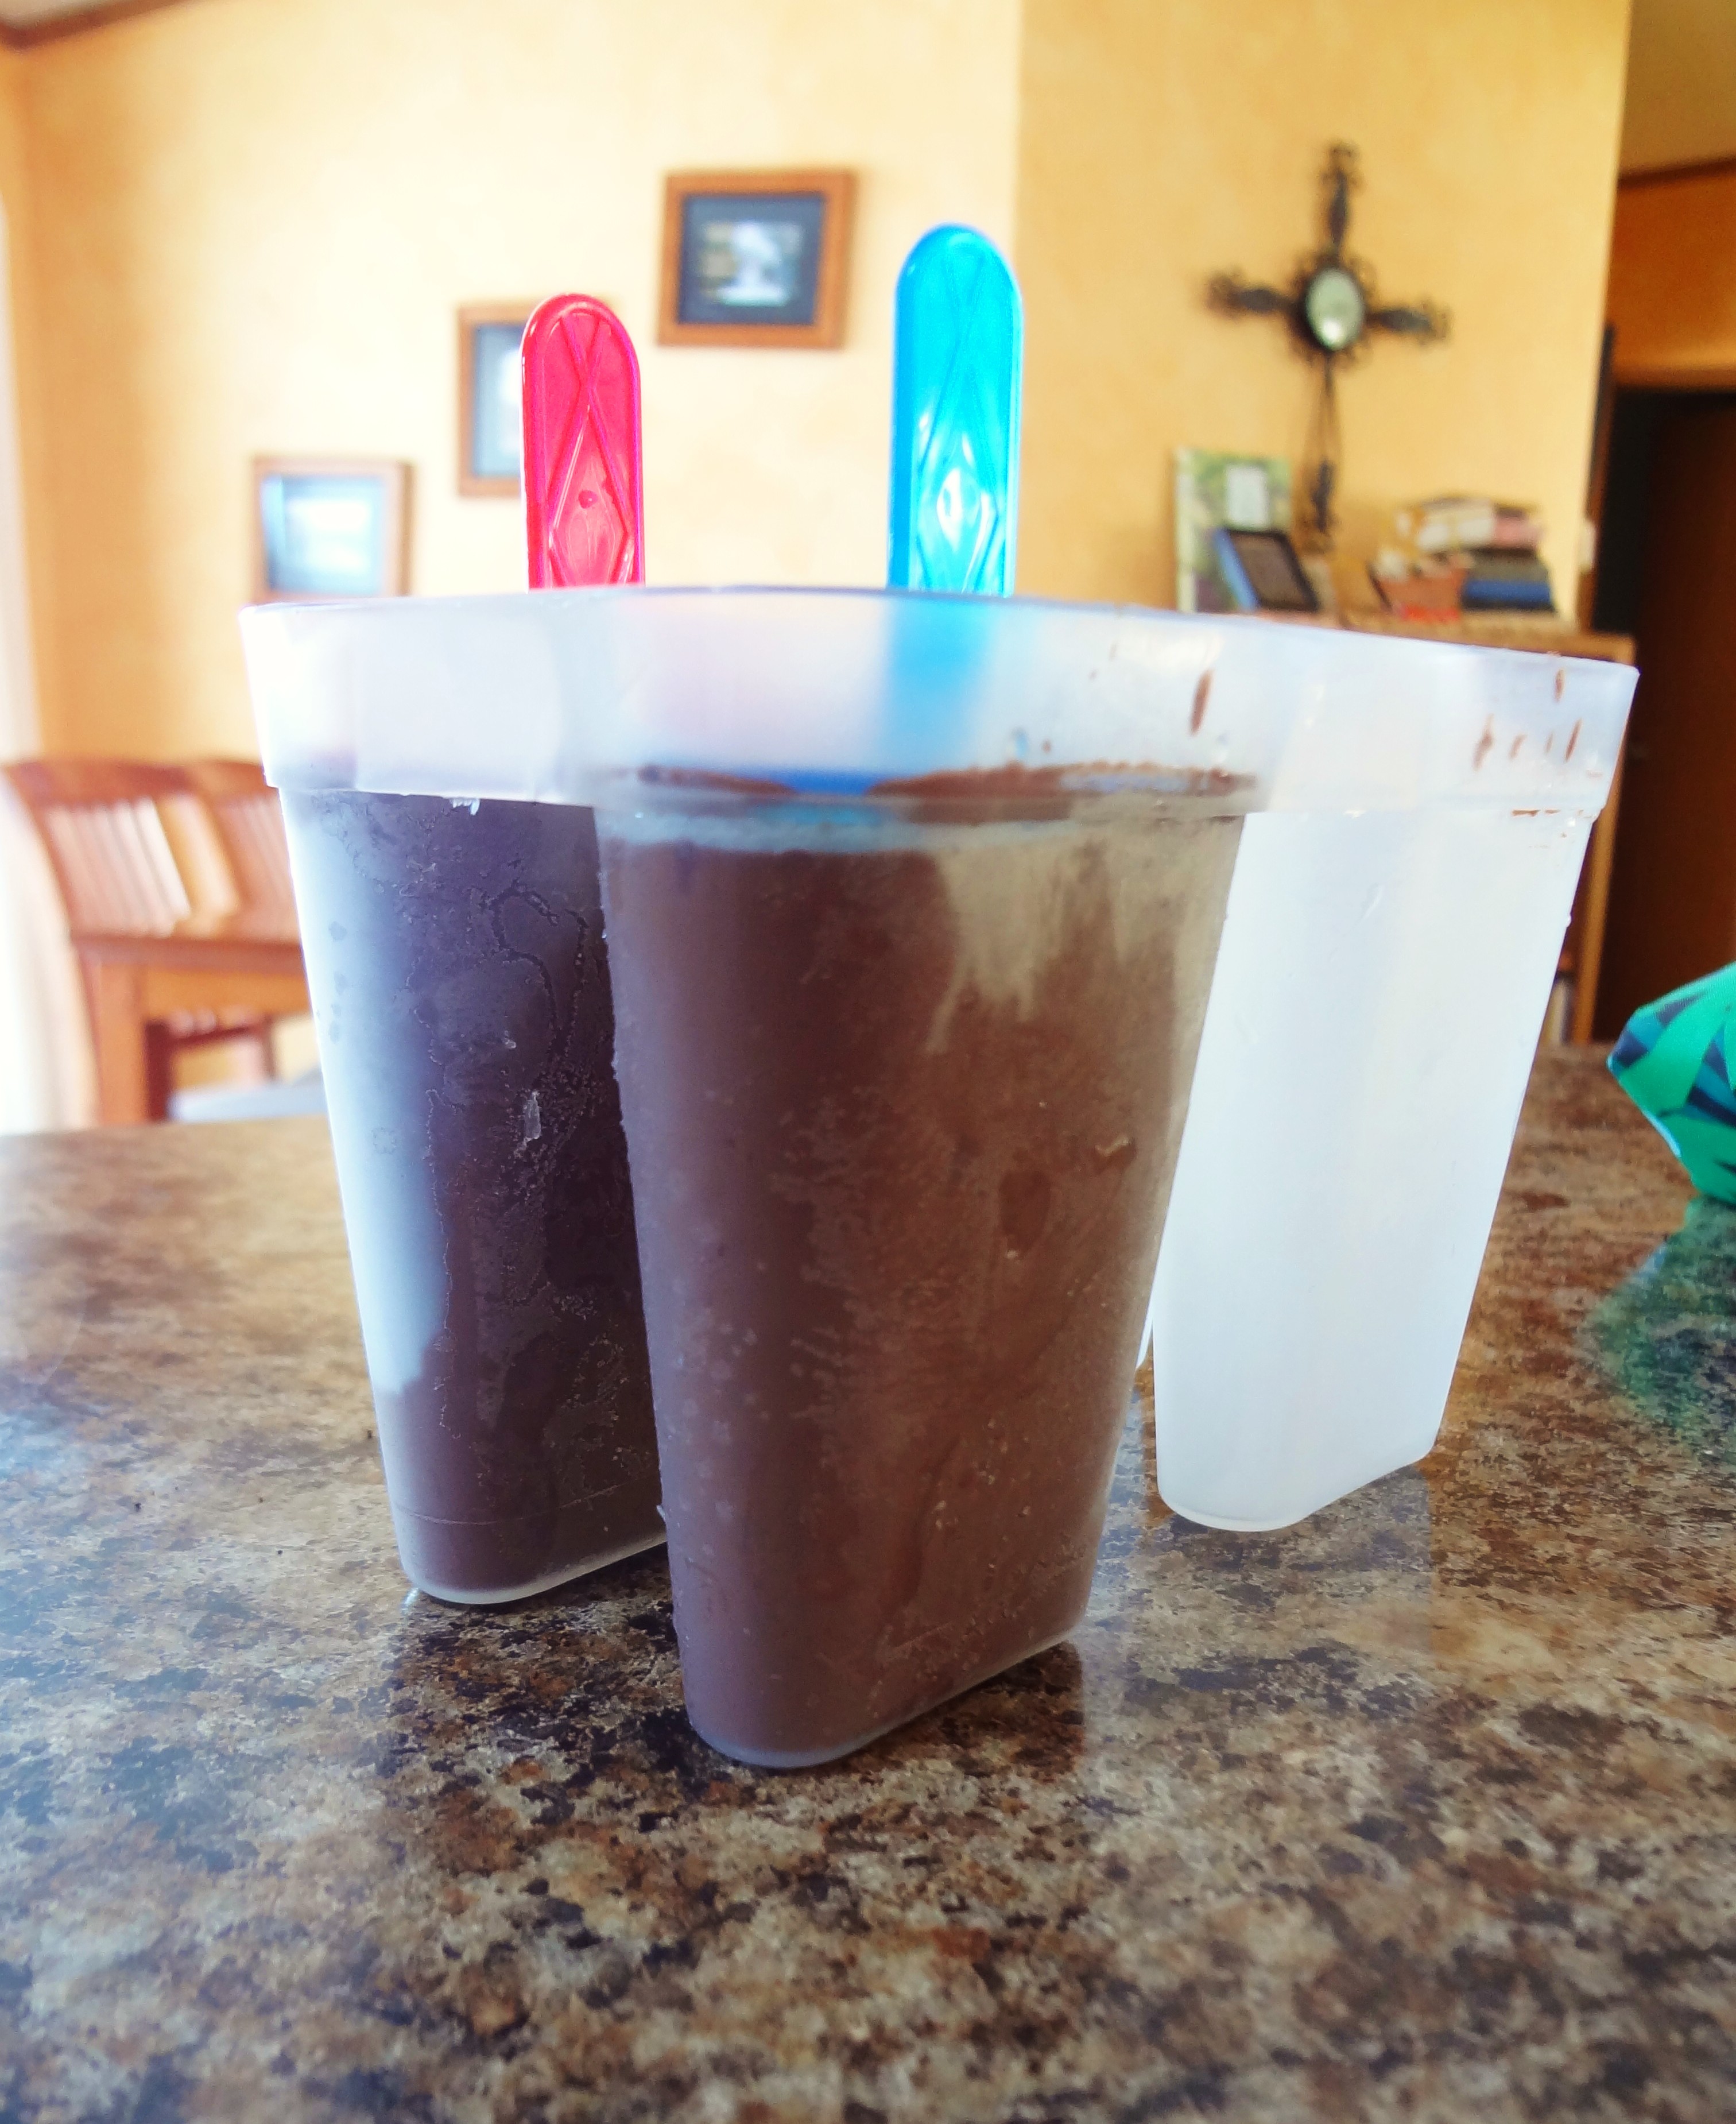 Craving a chocolatey frozen treat? Make these dairy free, soy free, and peanut free Dark Chocolate Popsicles (aka Fudgesicles) for a cool treat that's healthier than store-bought - @TheFitCookie #dairyfree #grainfree #glutenfree #popsicles